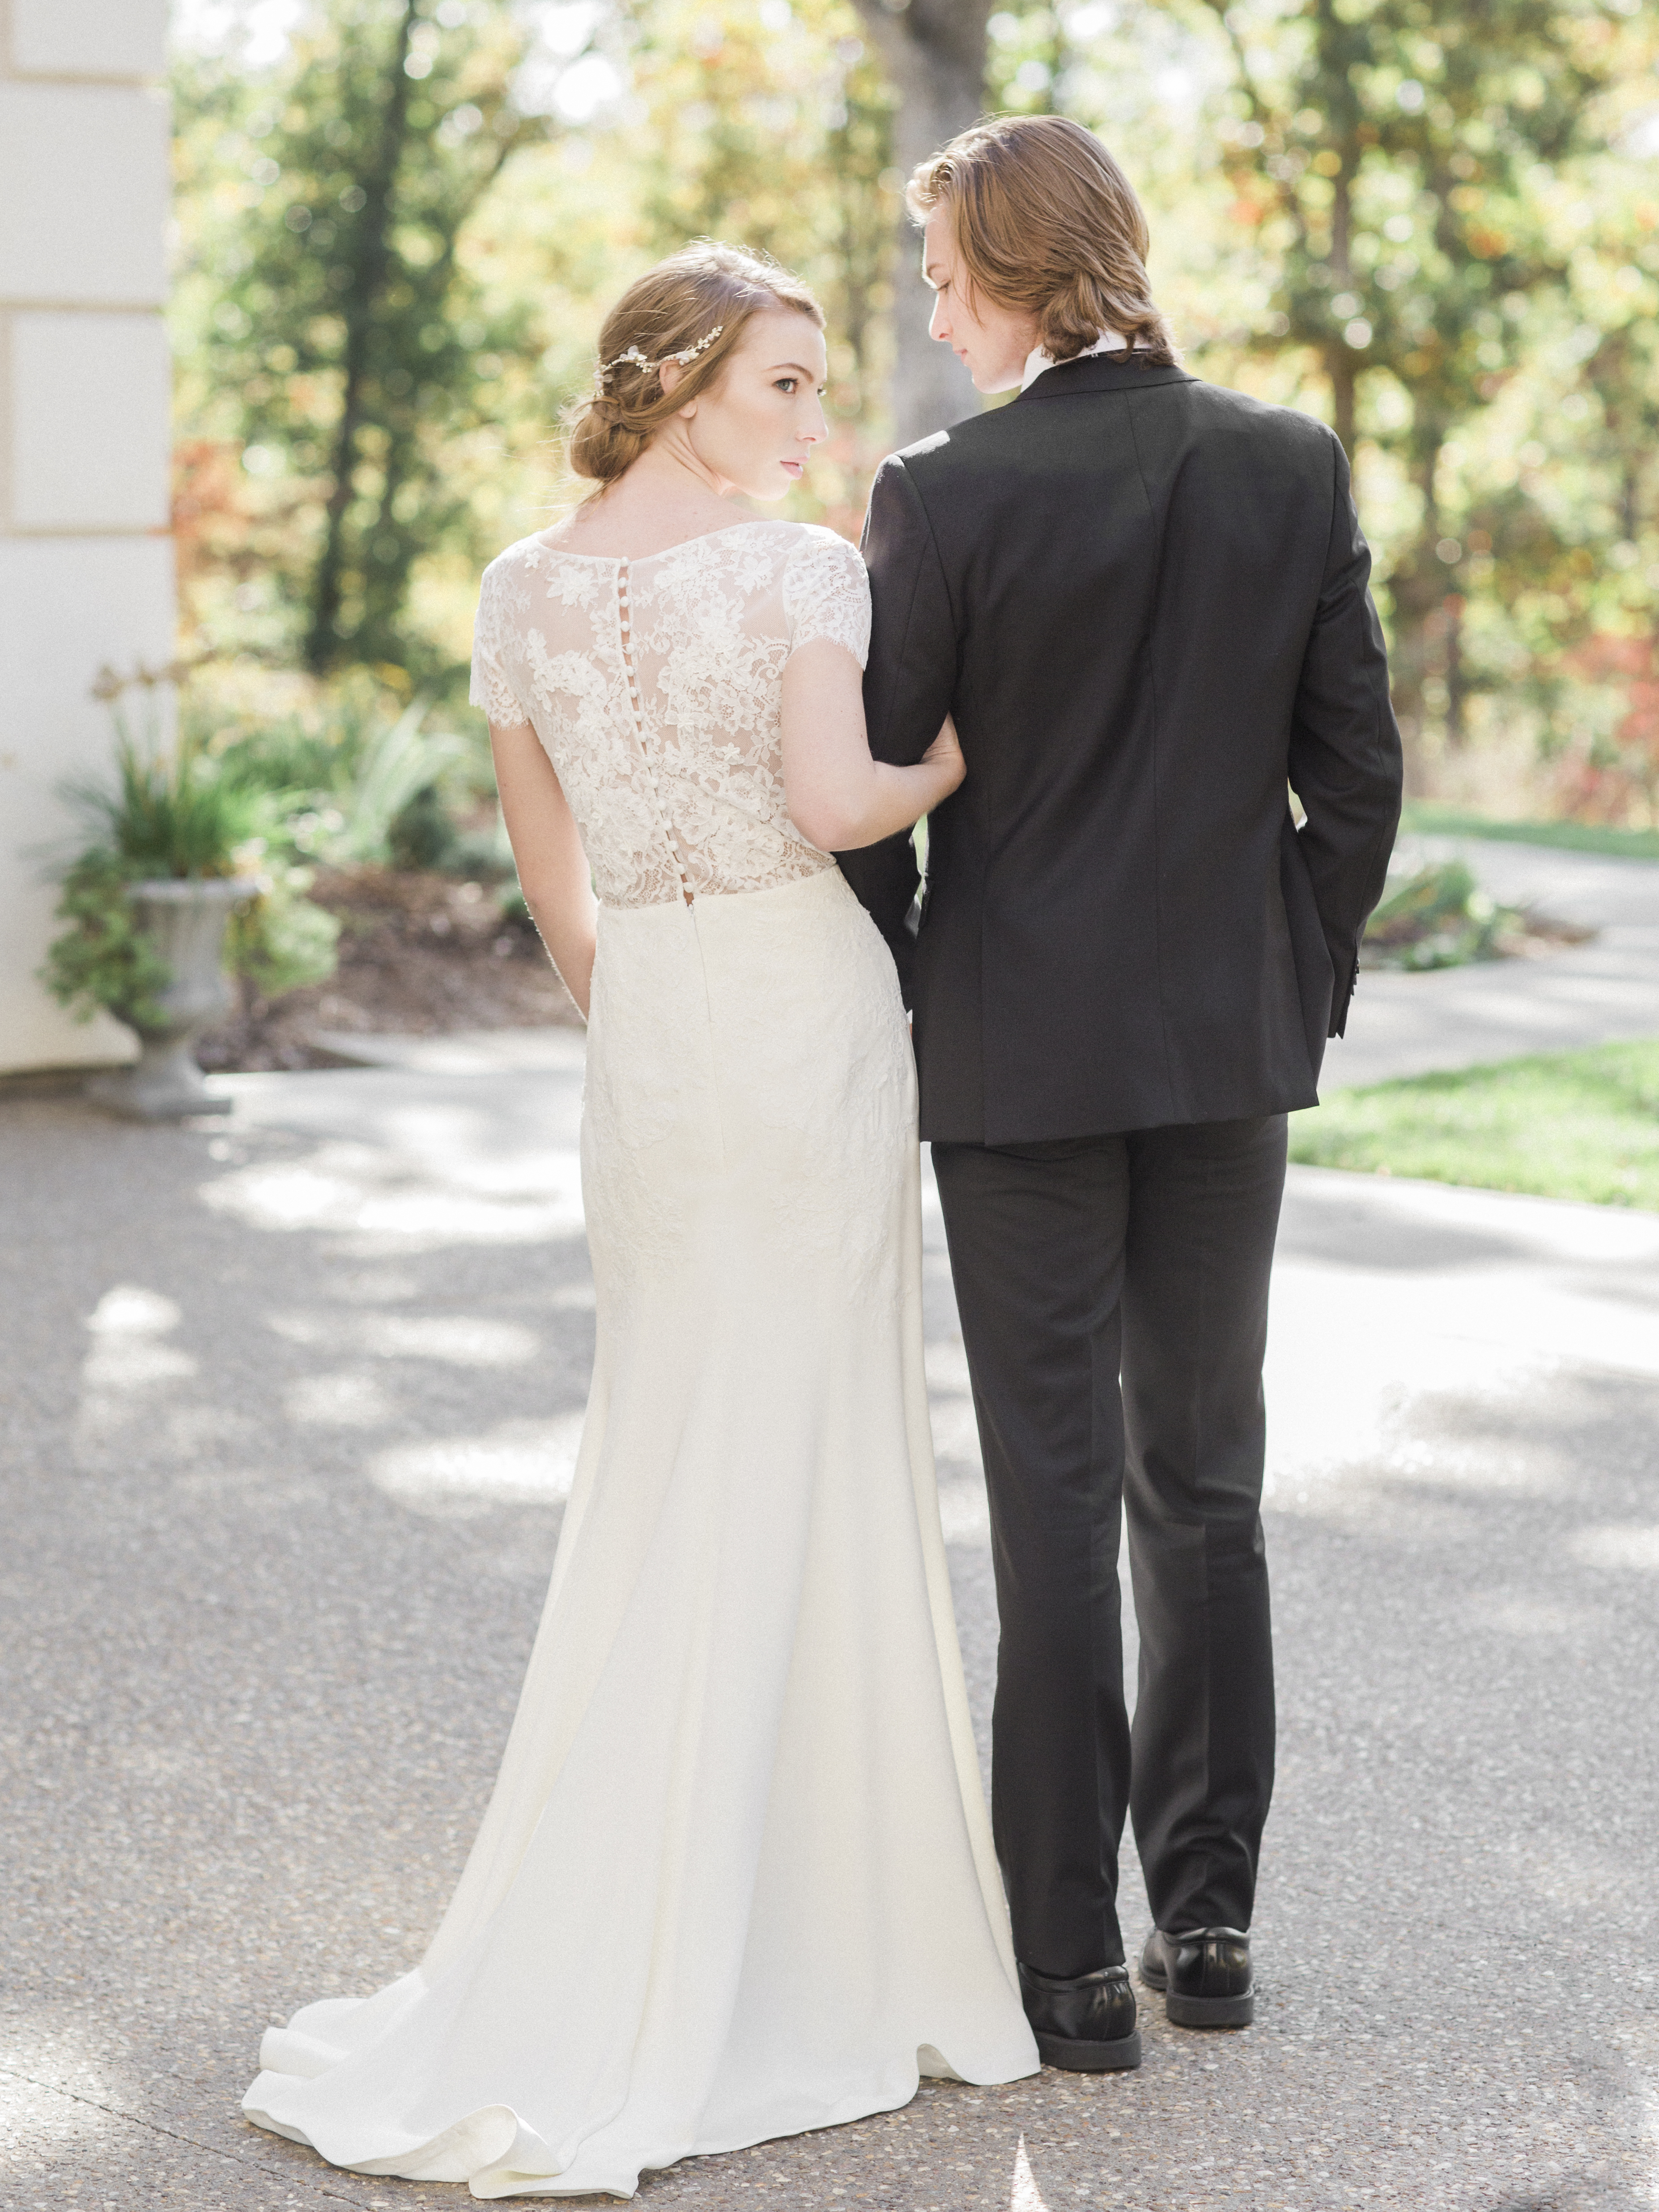 A moment between bride and groom captured by Missouri wedding photographer Love Tree Studios at Silver Oaks Chateau.